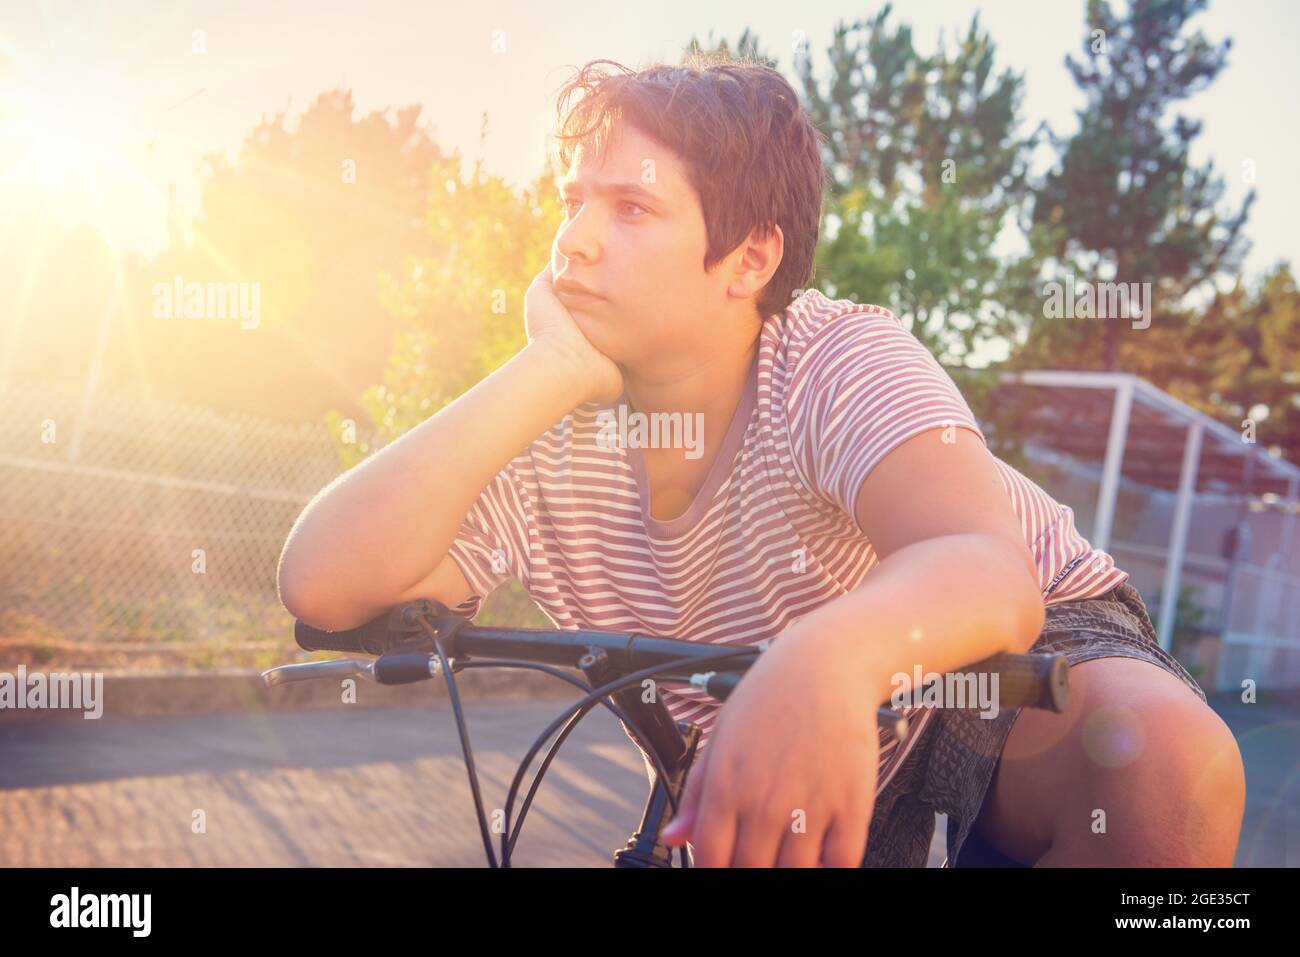 Boy posing in a bicycle outdoors at sunset Stock Photo